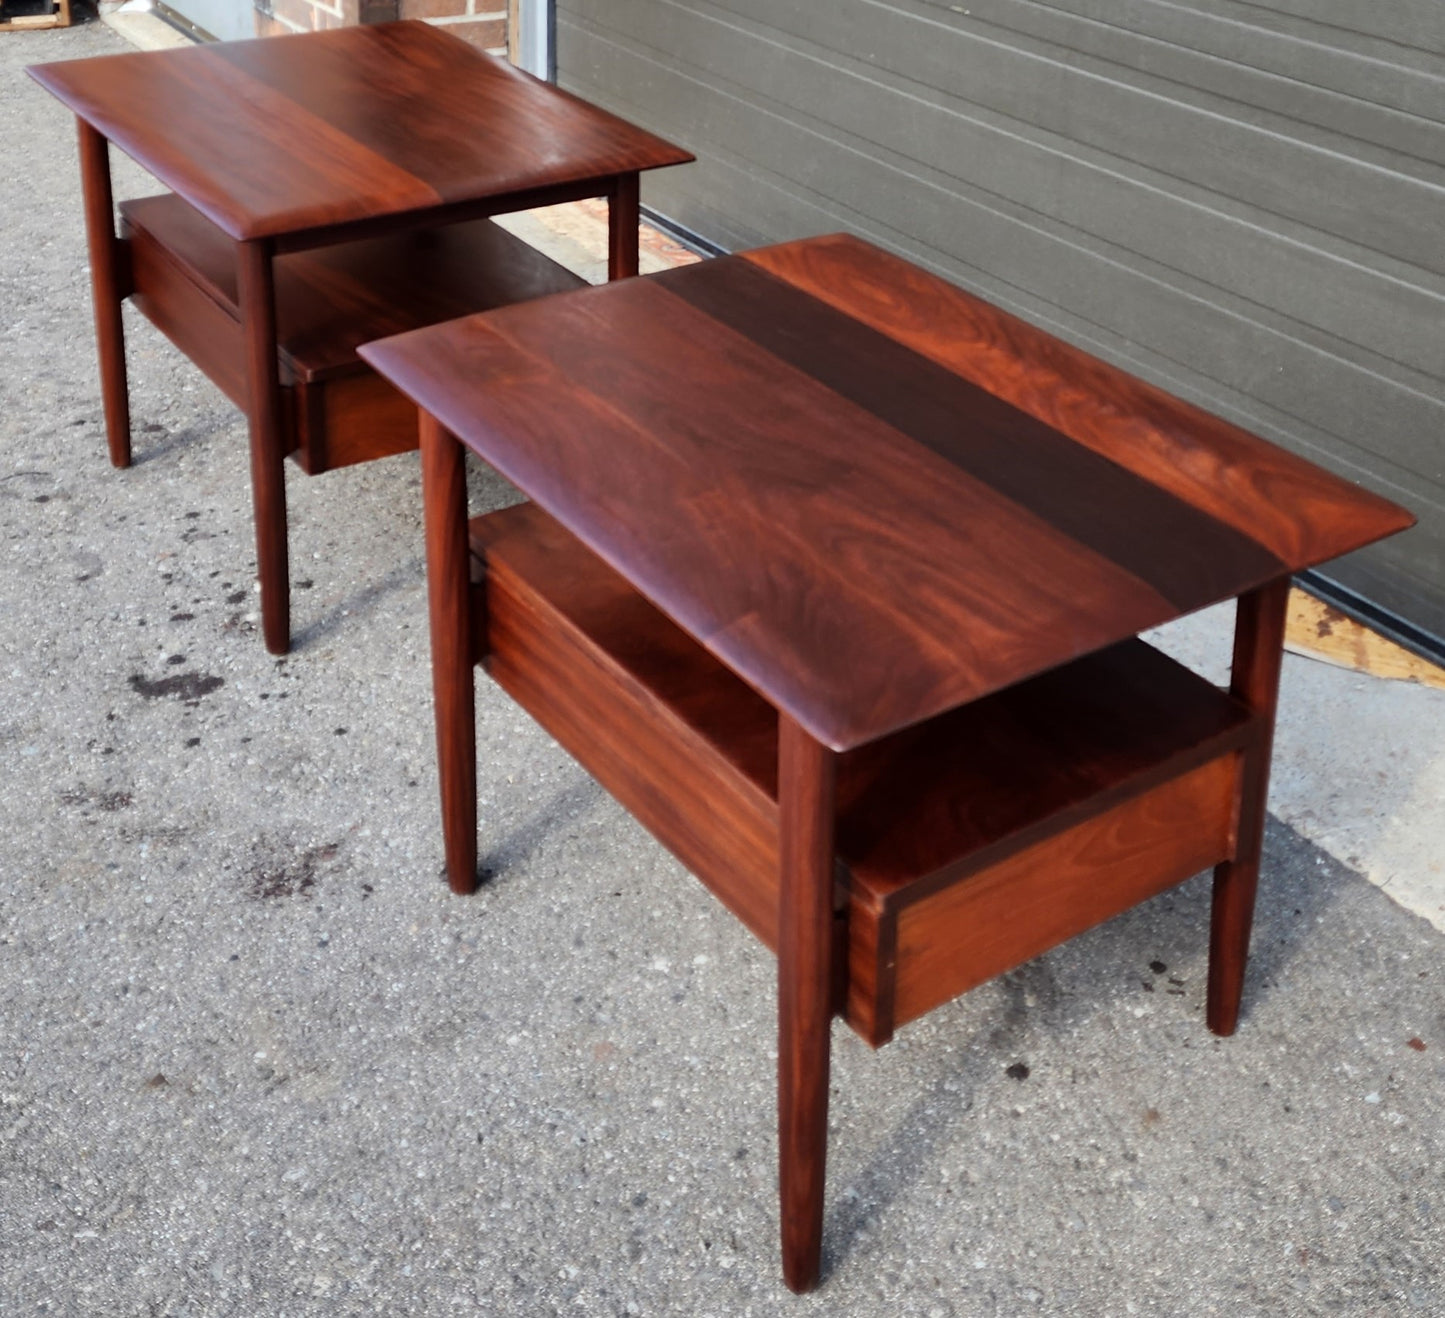 REFINISHED Mid Century Modern Solid Teak Side Table w Drawers by Imperial (2 available)